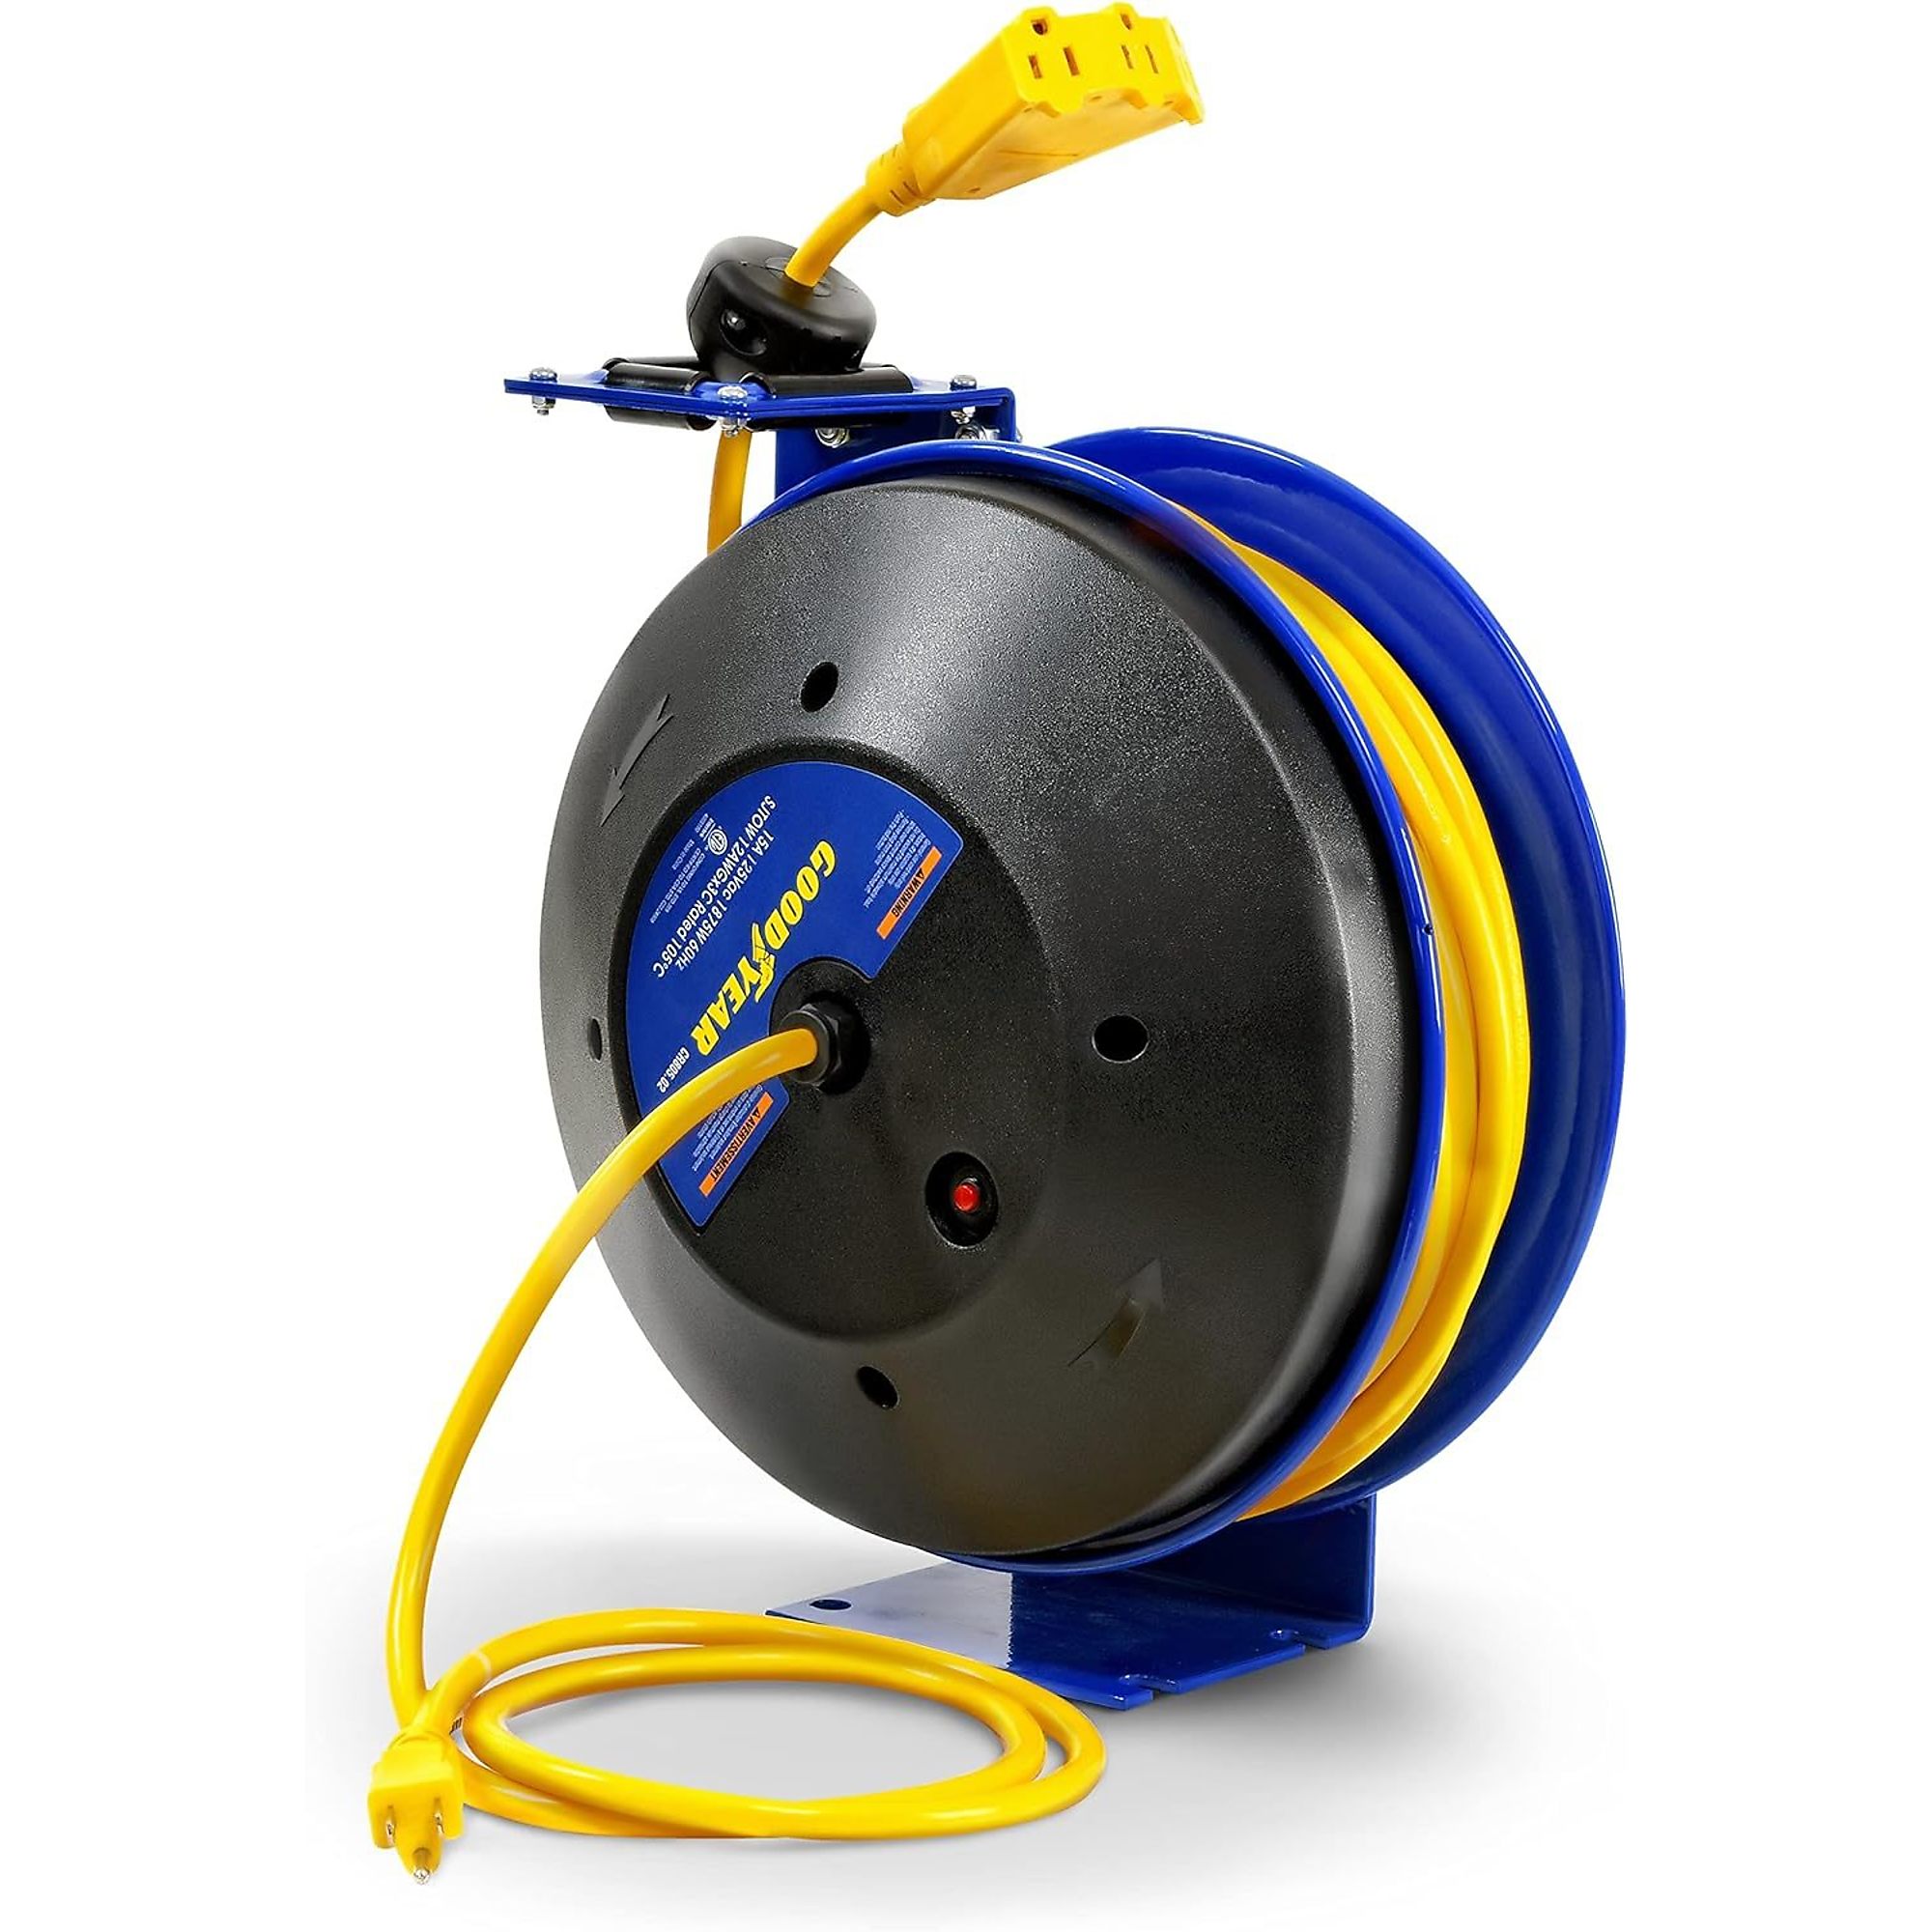 Goodyear, Retractable Extension Cord Reel 12AWGx50ft., Length 50 ft, Cable Gauge  12 Model# TRI-GUR074